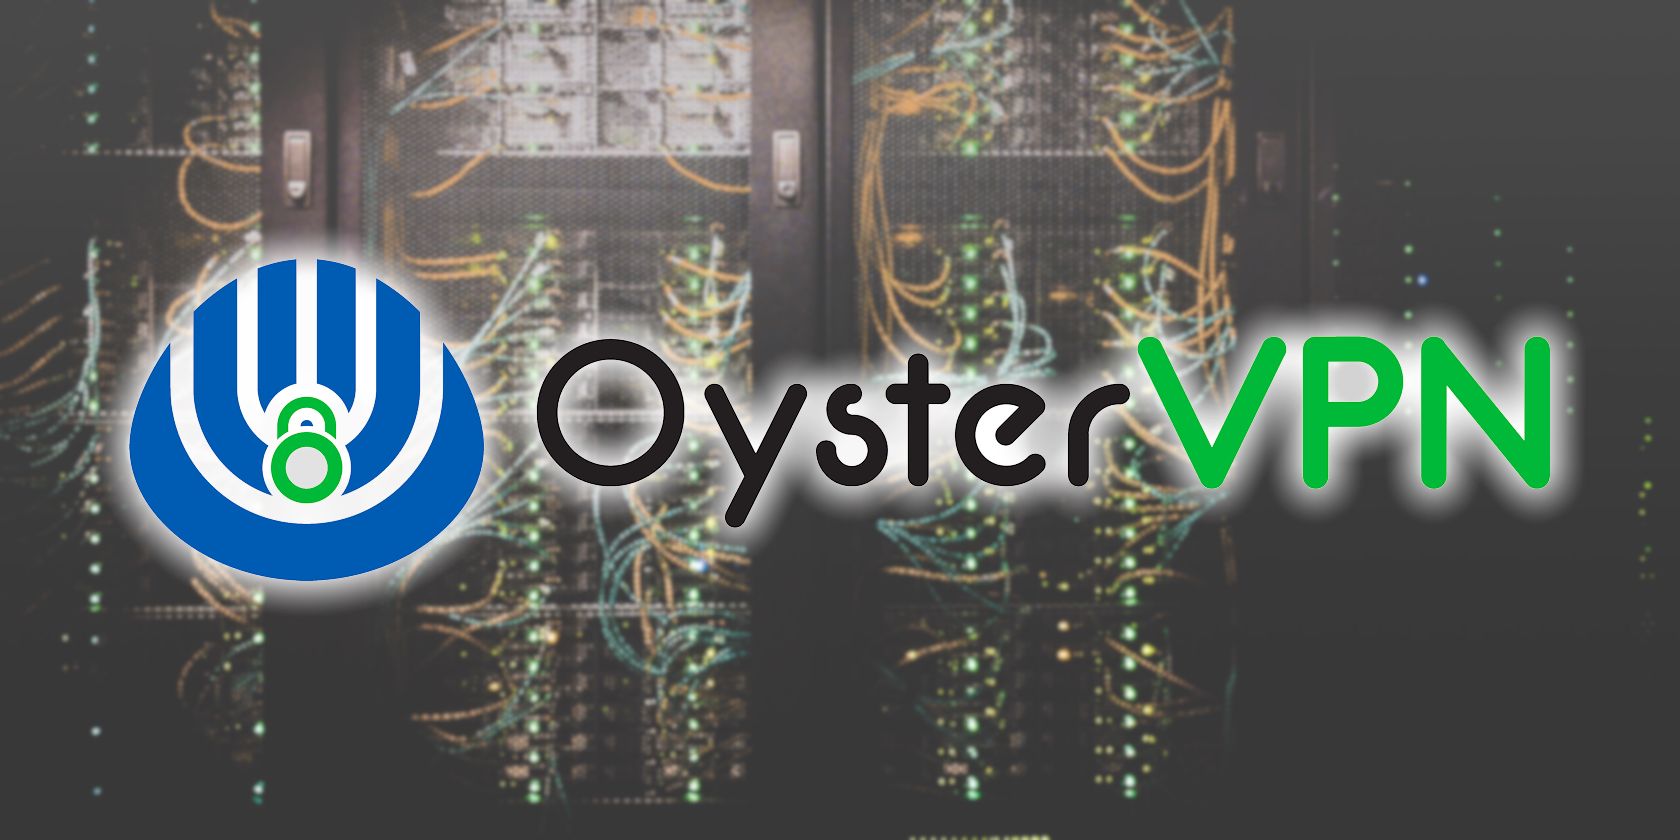 oystervpn logo on server mounting background feature